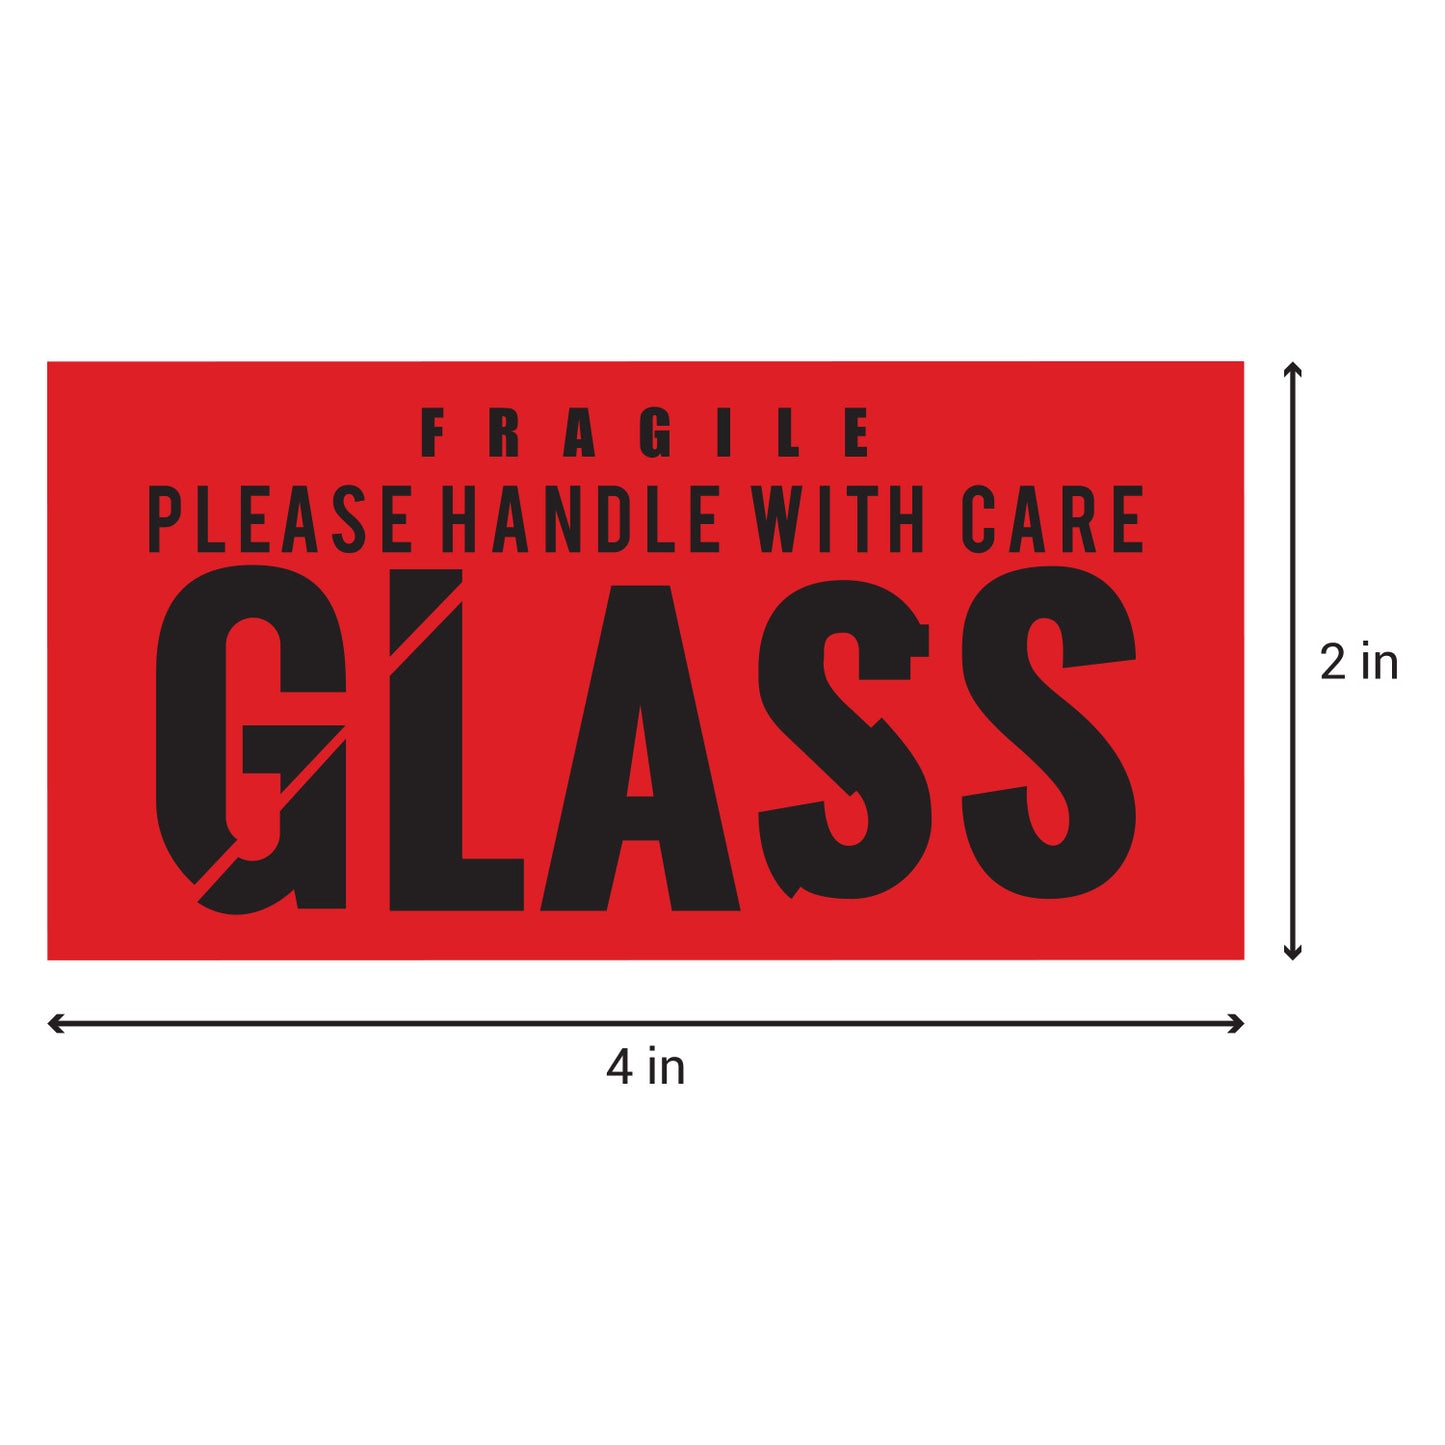 4 x 2 inch | Shipping & Handling: Fragile, GLASS, Handle with Care Stickers